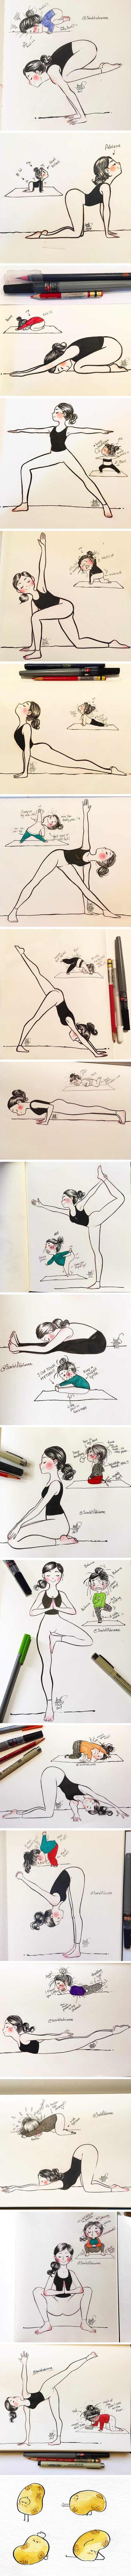 Yoga is harder than it looks, artist illustrates the expectation and reality in comic - Comic & Webtoon